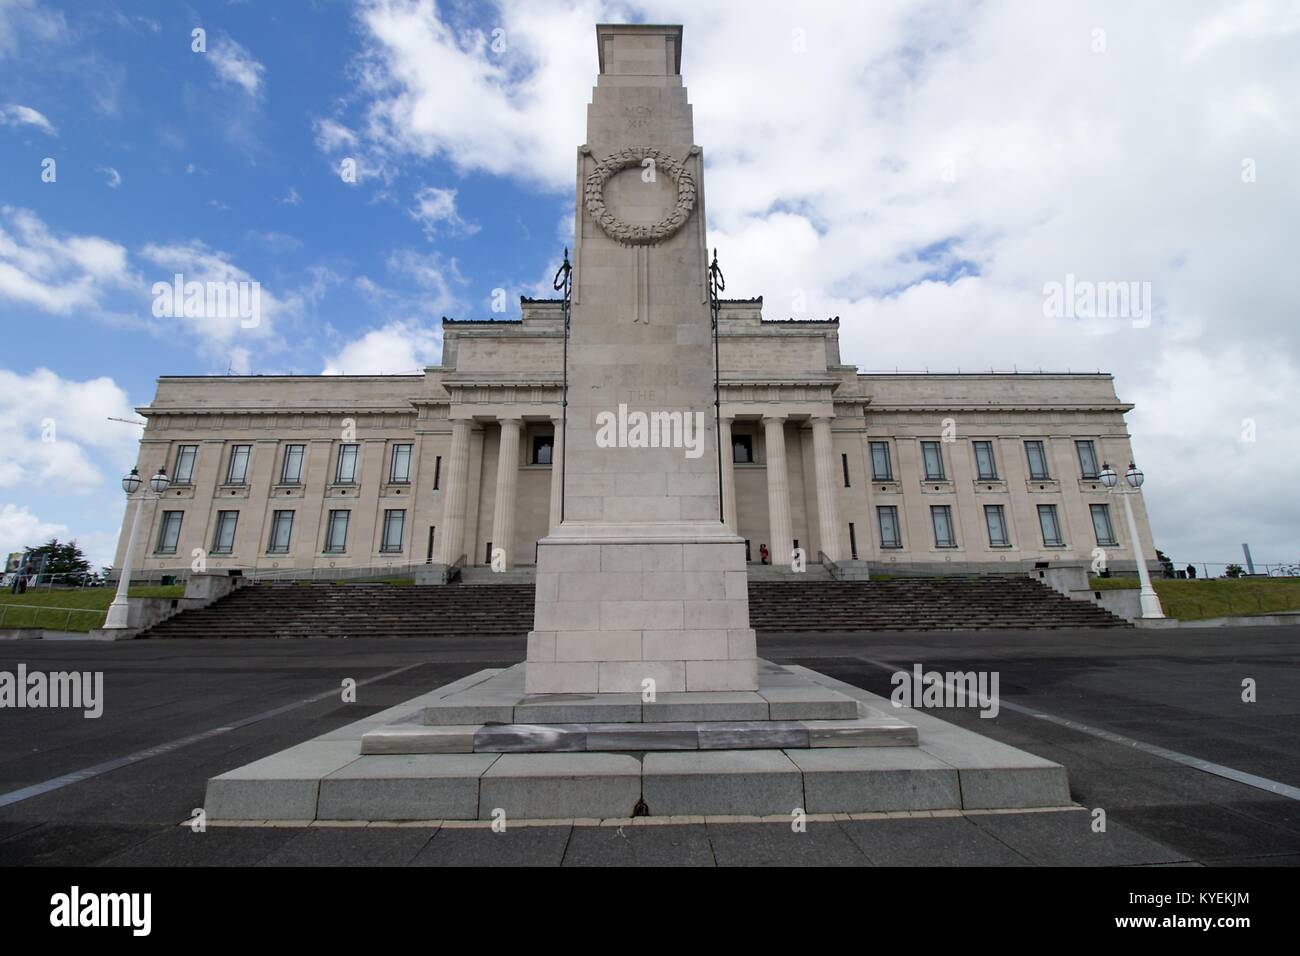 Monument outside the Auckland War Memorial Museum with inscription reading 'The Glorious Dead', in Auckland, New Zealand, October 11, 2017. () Stock Photo